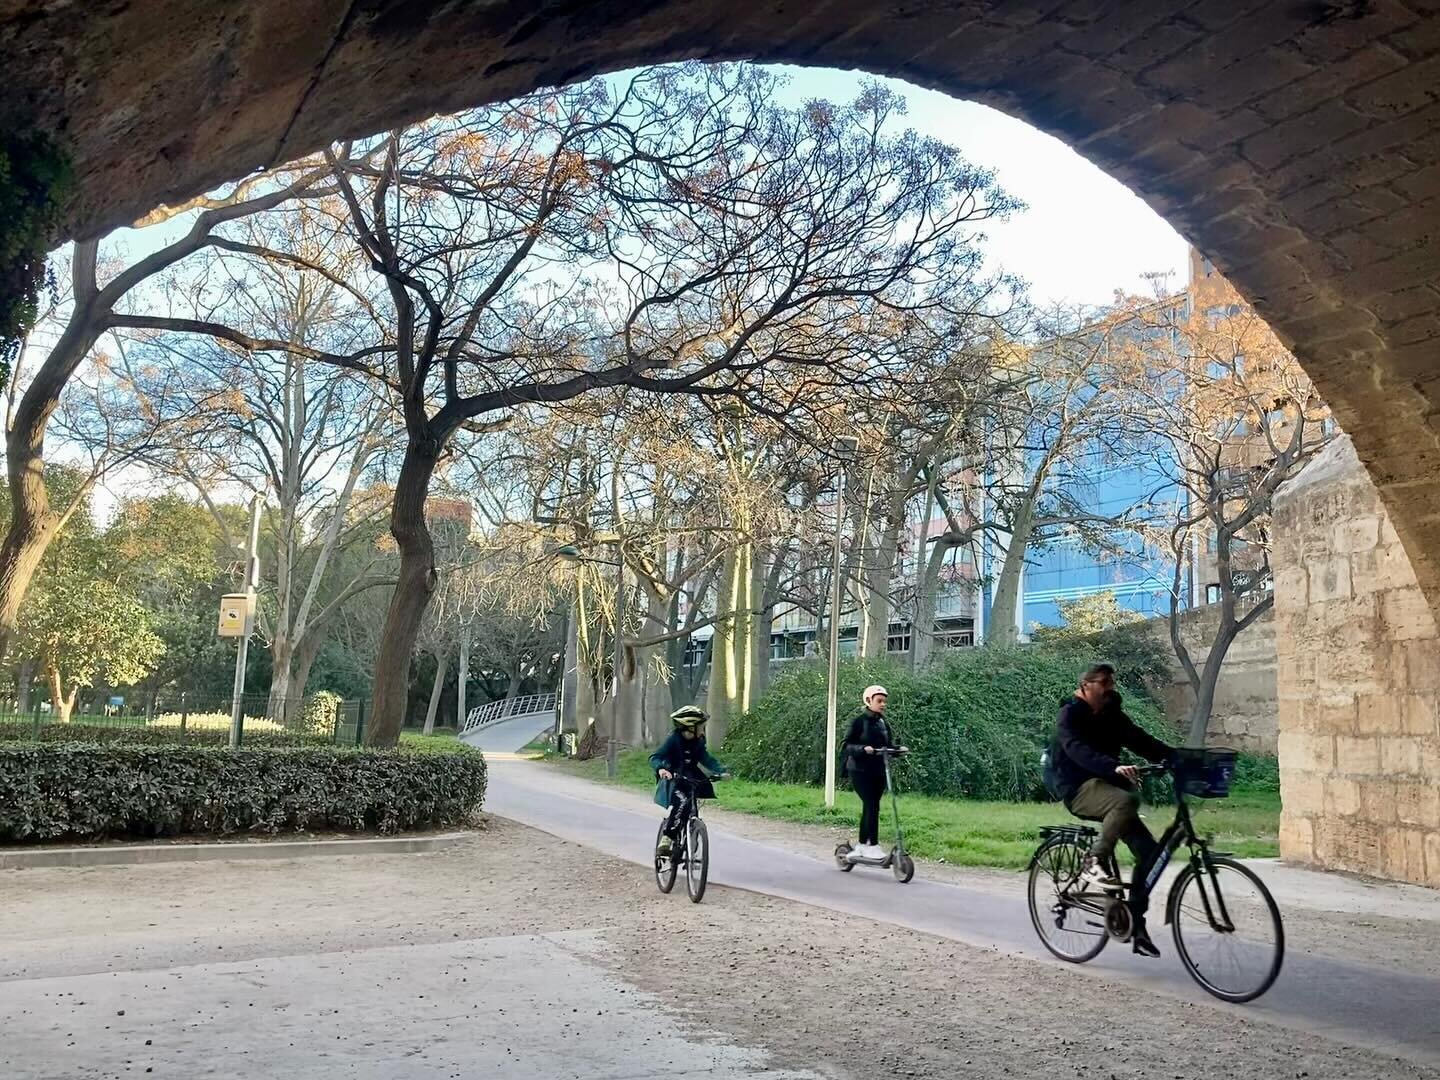 Some pics I took while reporting on Valencia as the Green Capital of Europe for @CNNTravel.  I learned a lot on this assignment:  A whopping  97% of residents live less than 300 meters from a major green area.  From the converted riverbed park of the